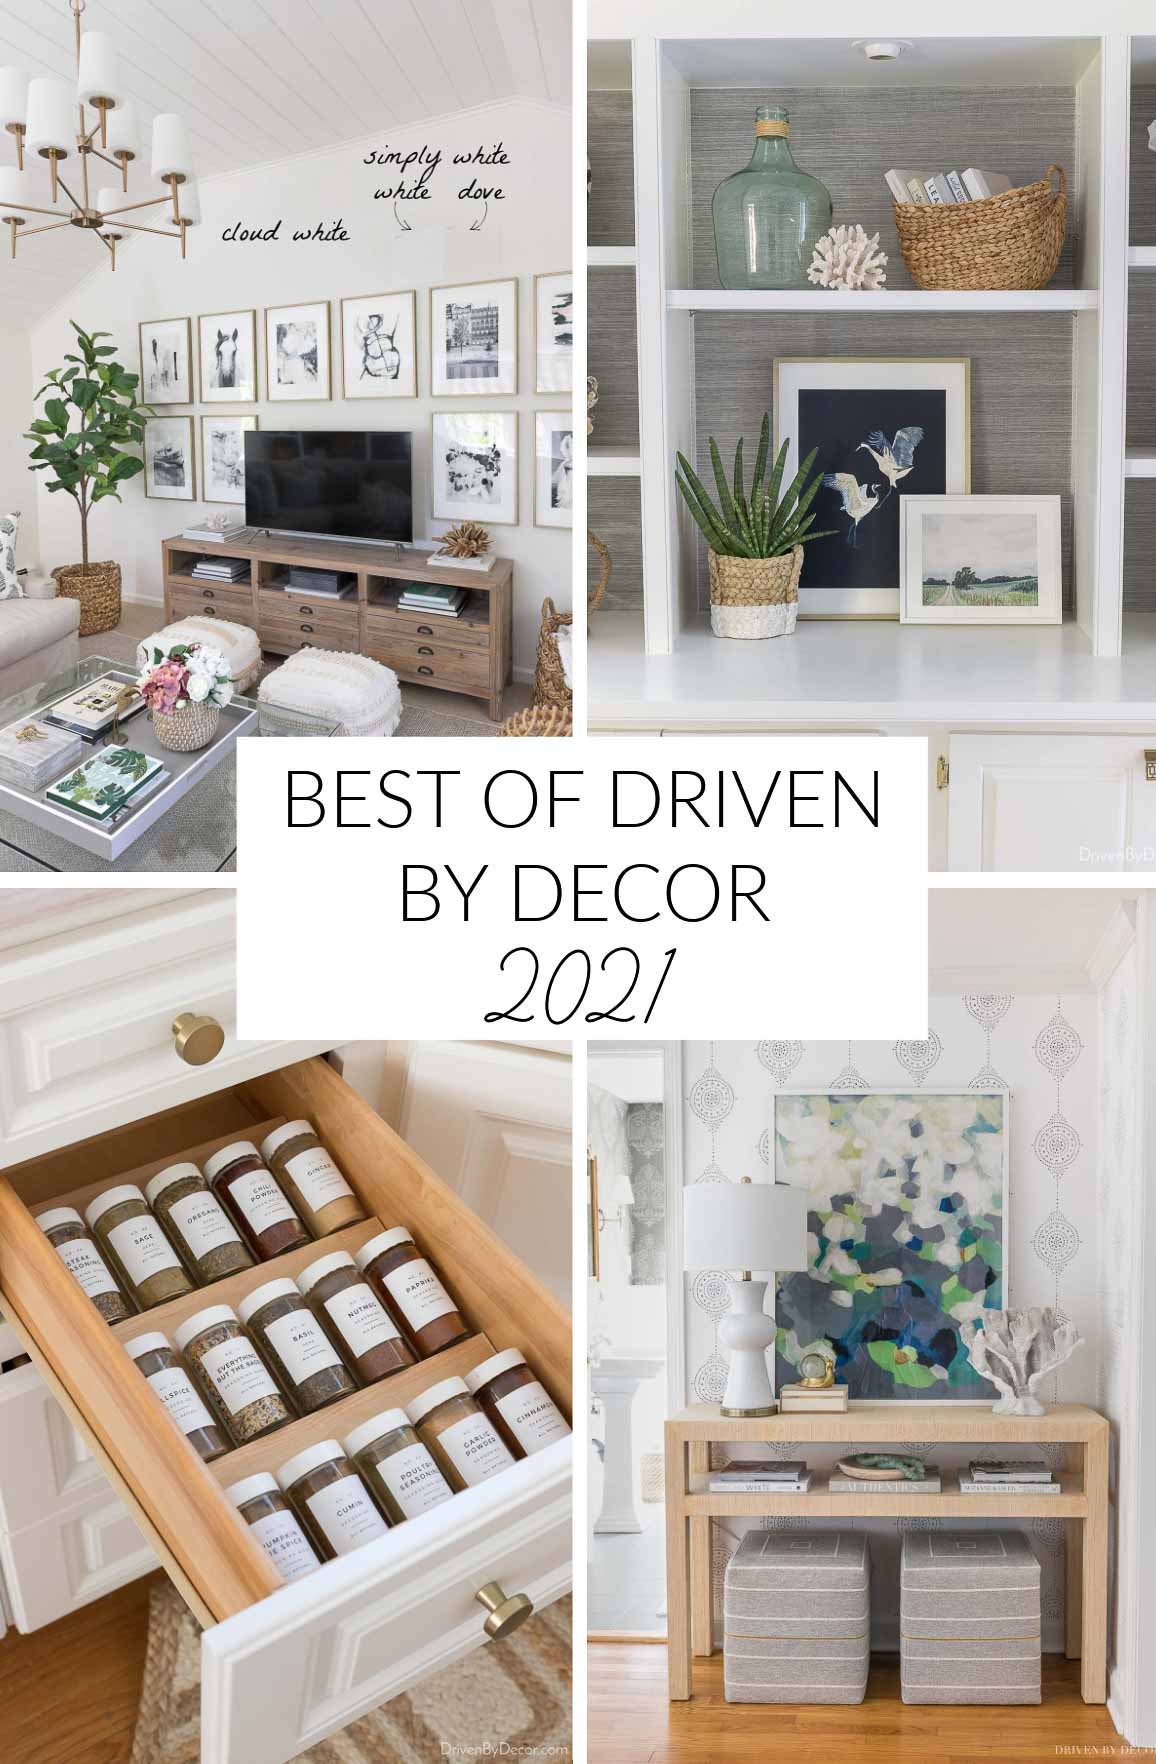 The best of Driven by Decor 2021